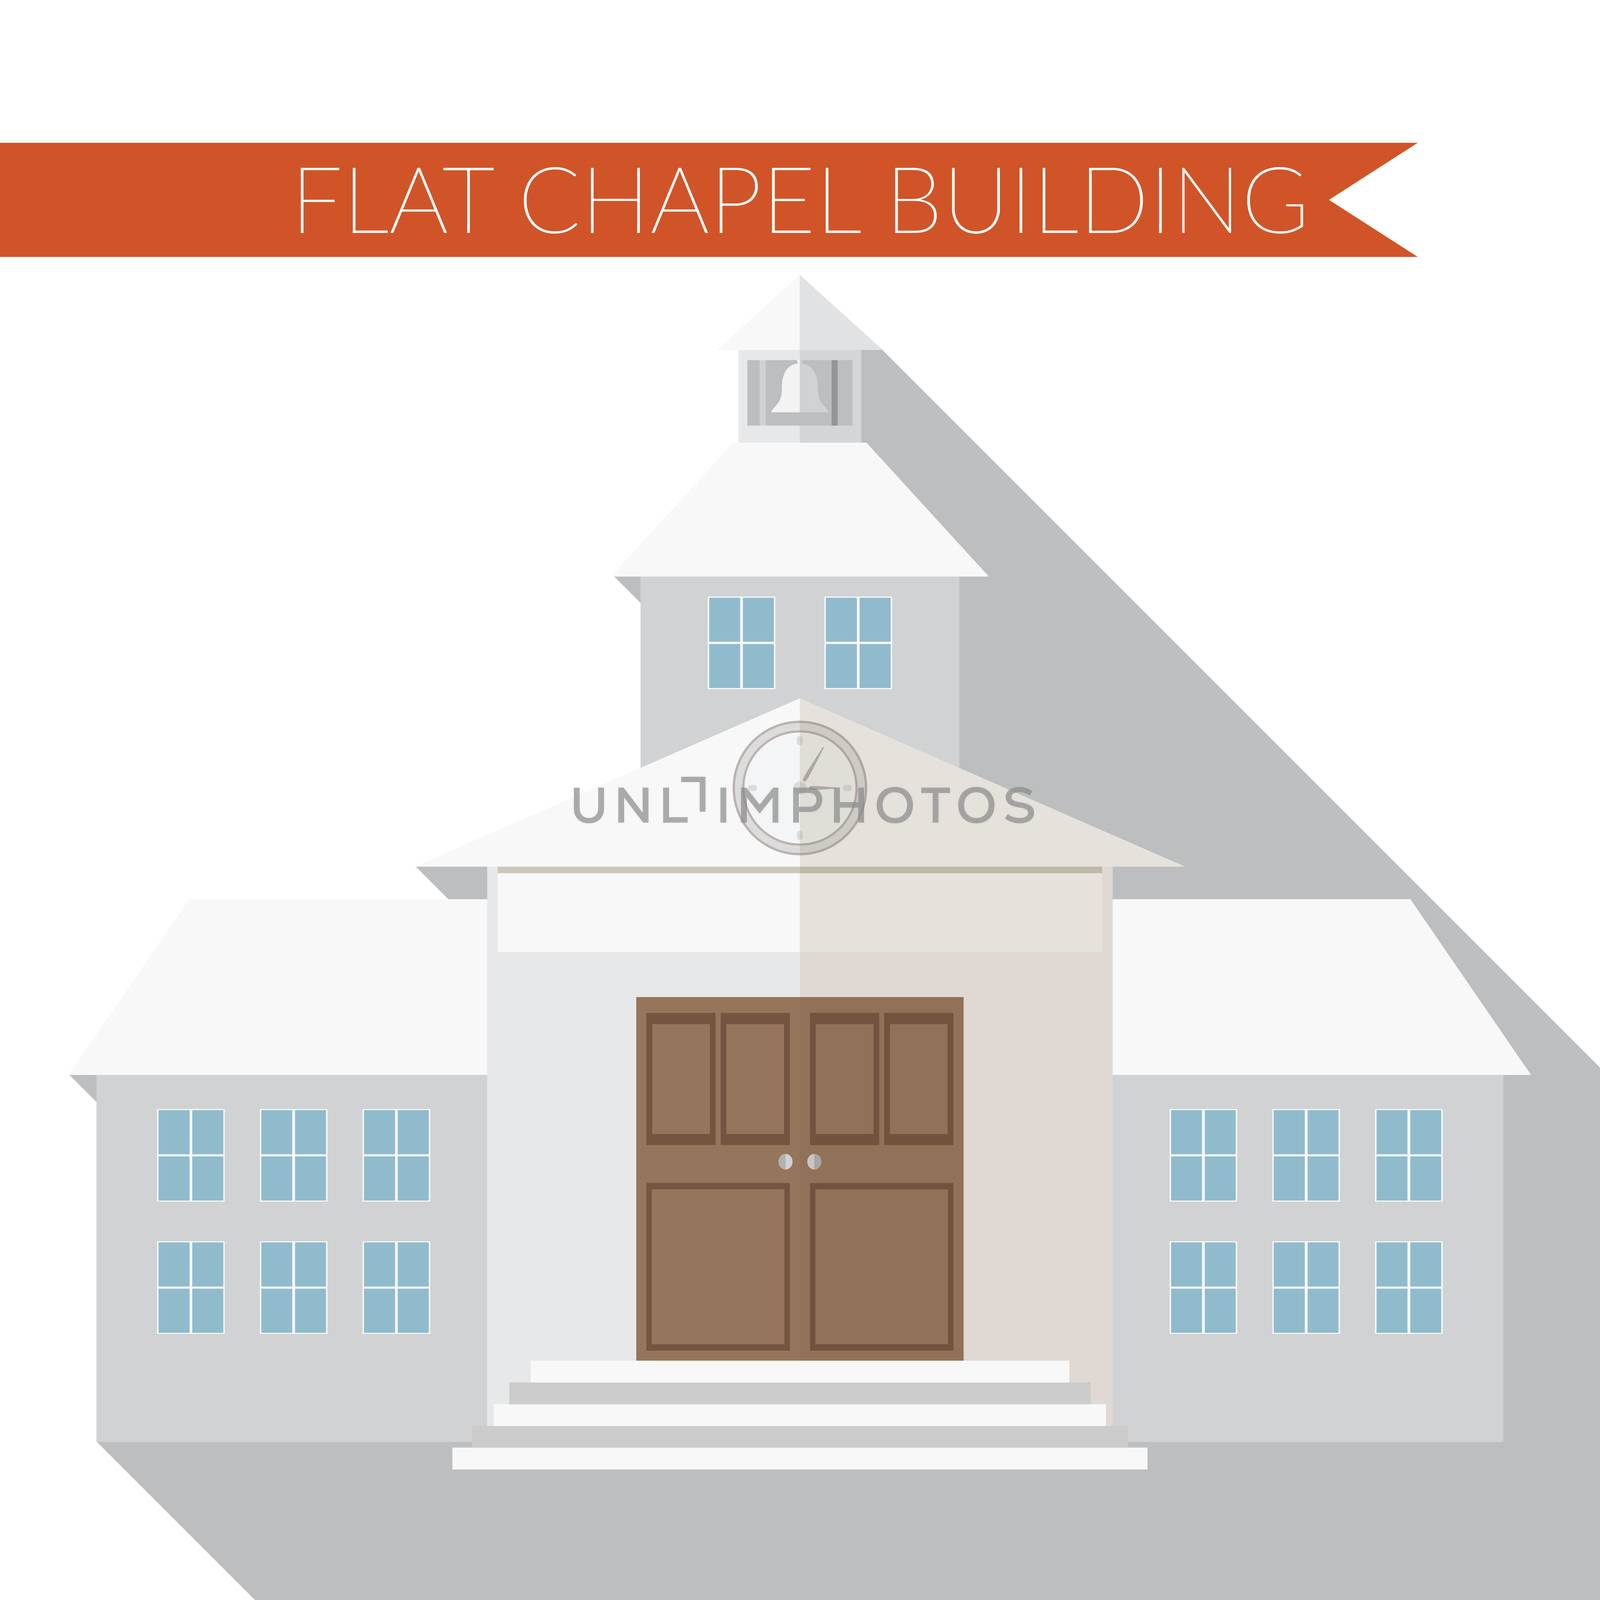 Flat design modern vector illustration of chapel or wedding church building icon, with long shadow by Lemon_workshop